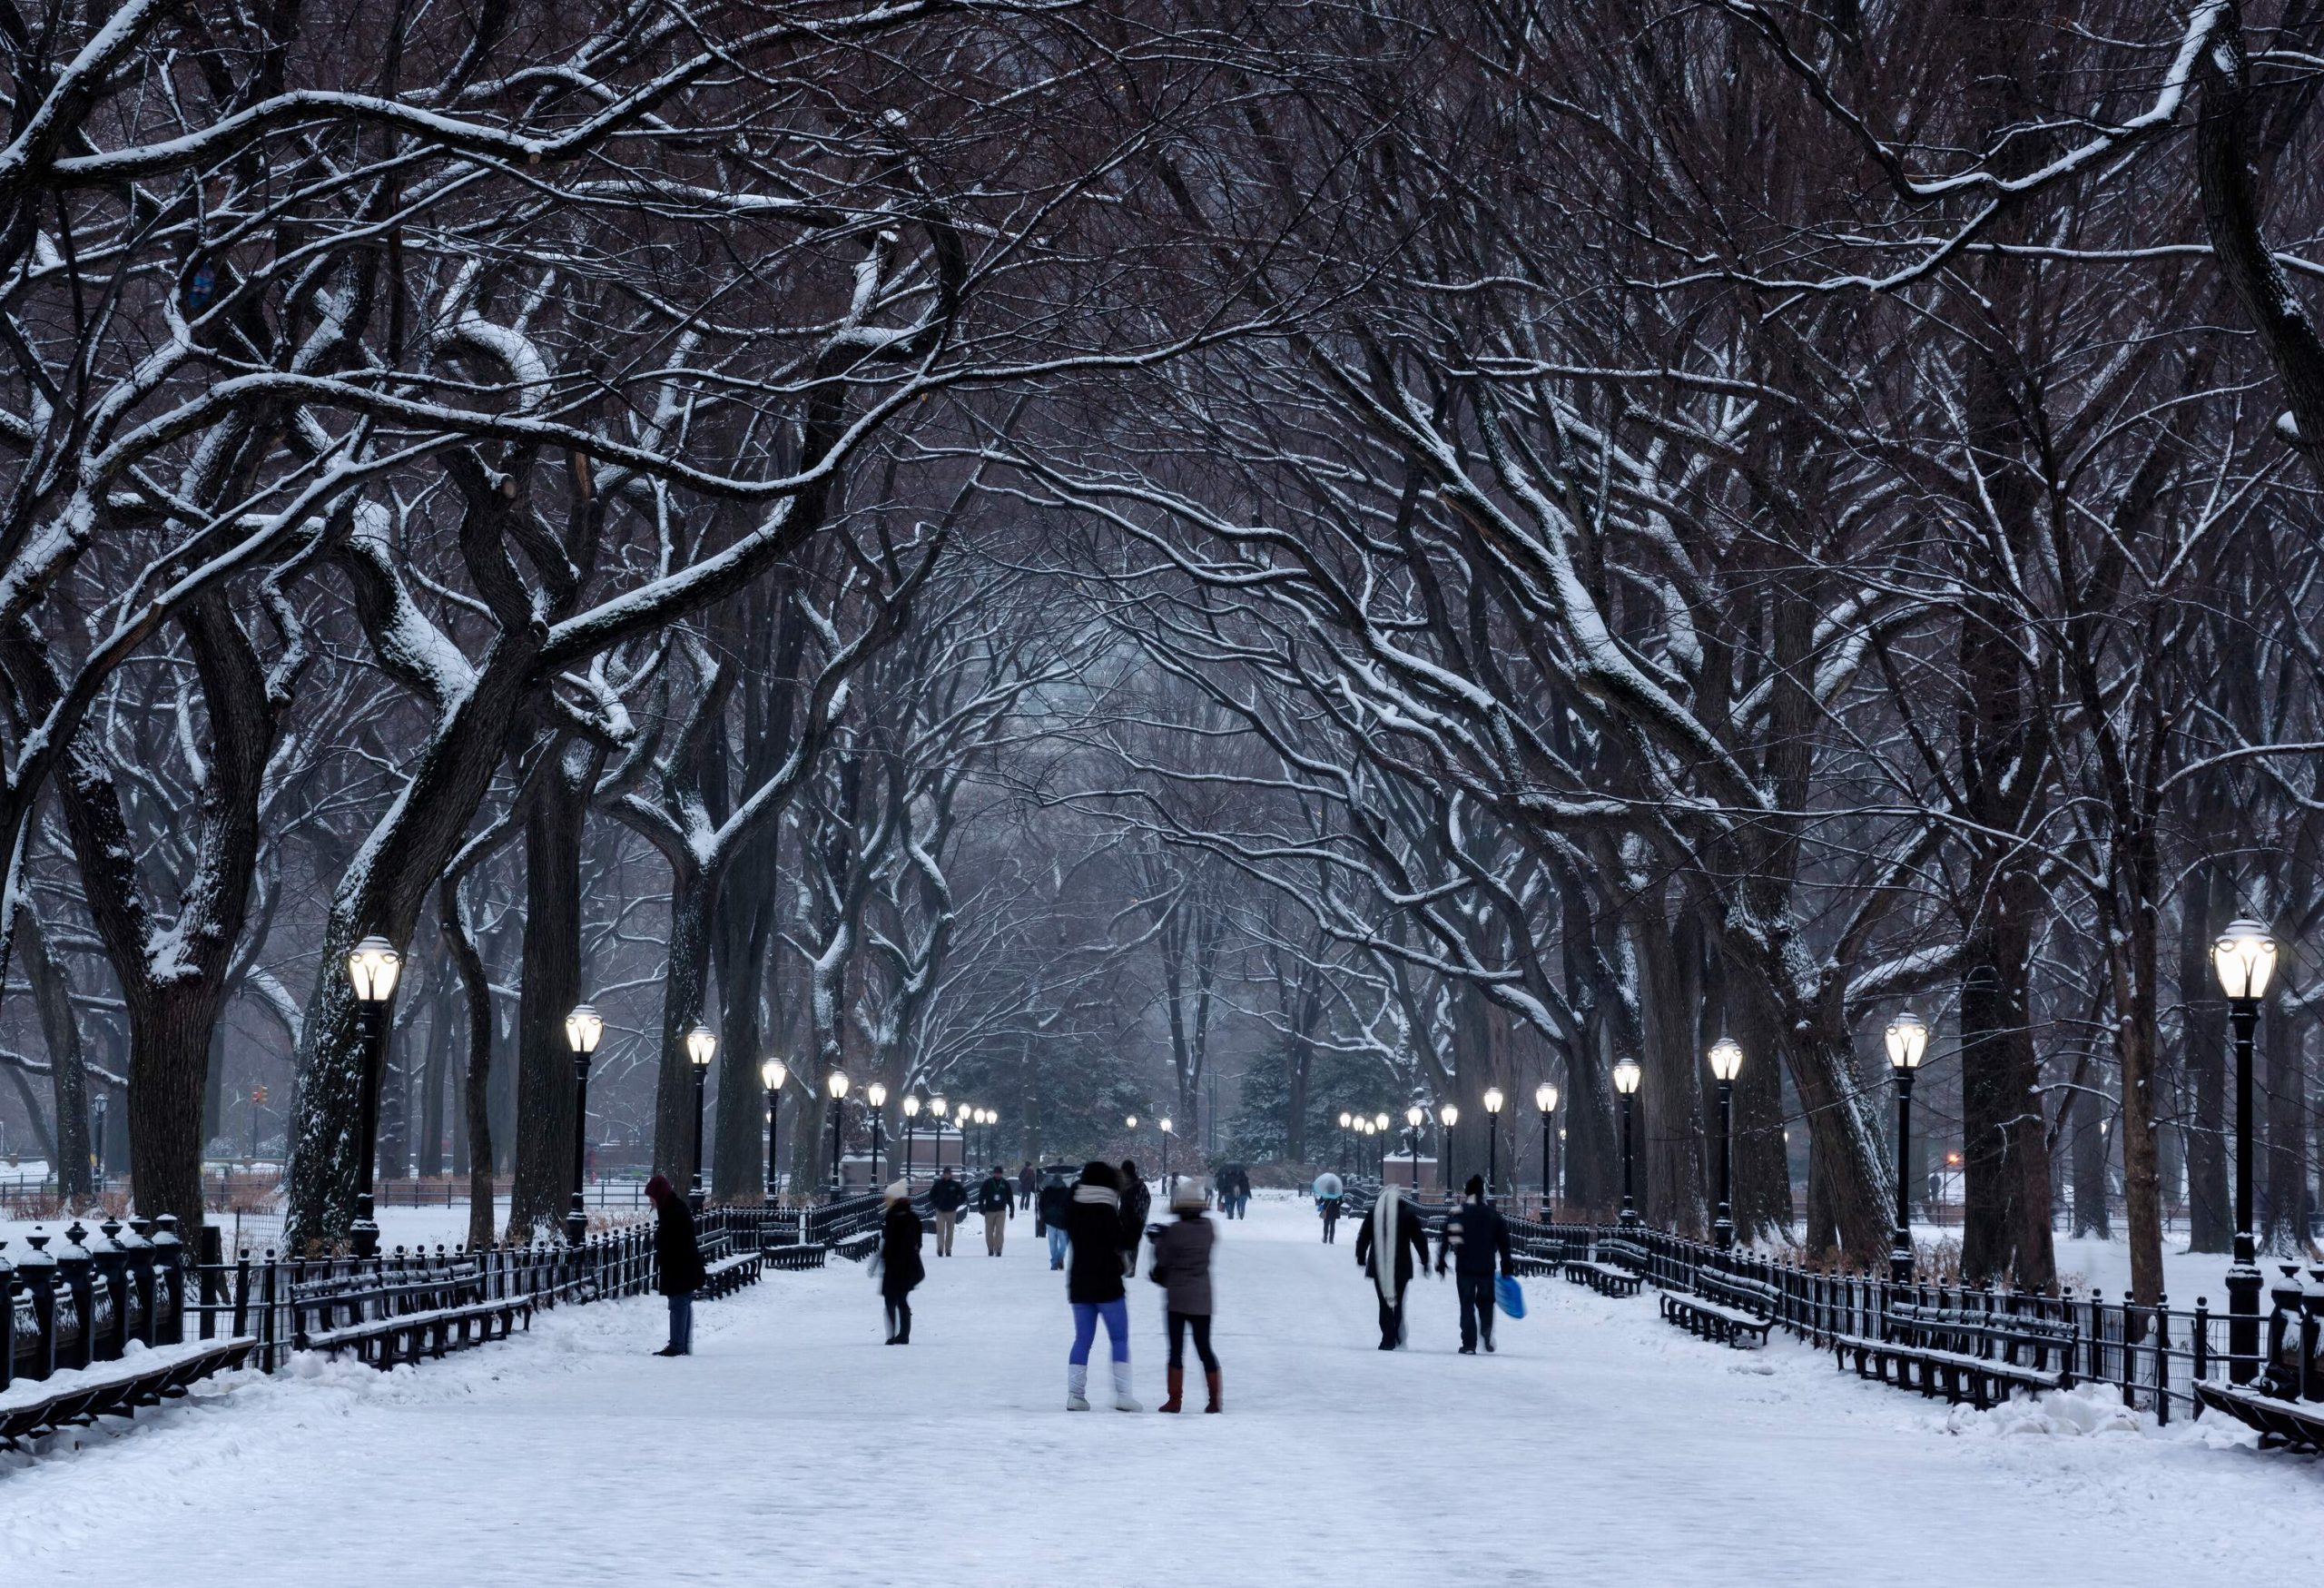 People in winter clothes stroll on the ice-filled pedestrian esplanade lined with rows of elm trees and lighted lampposts.